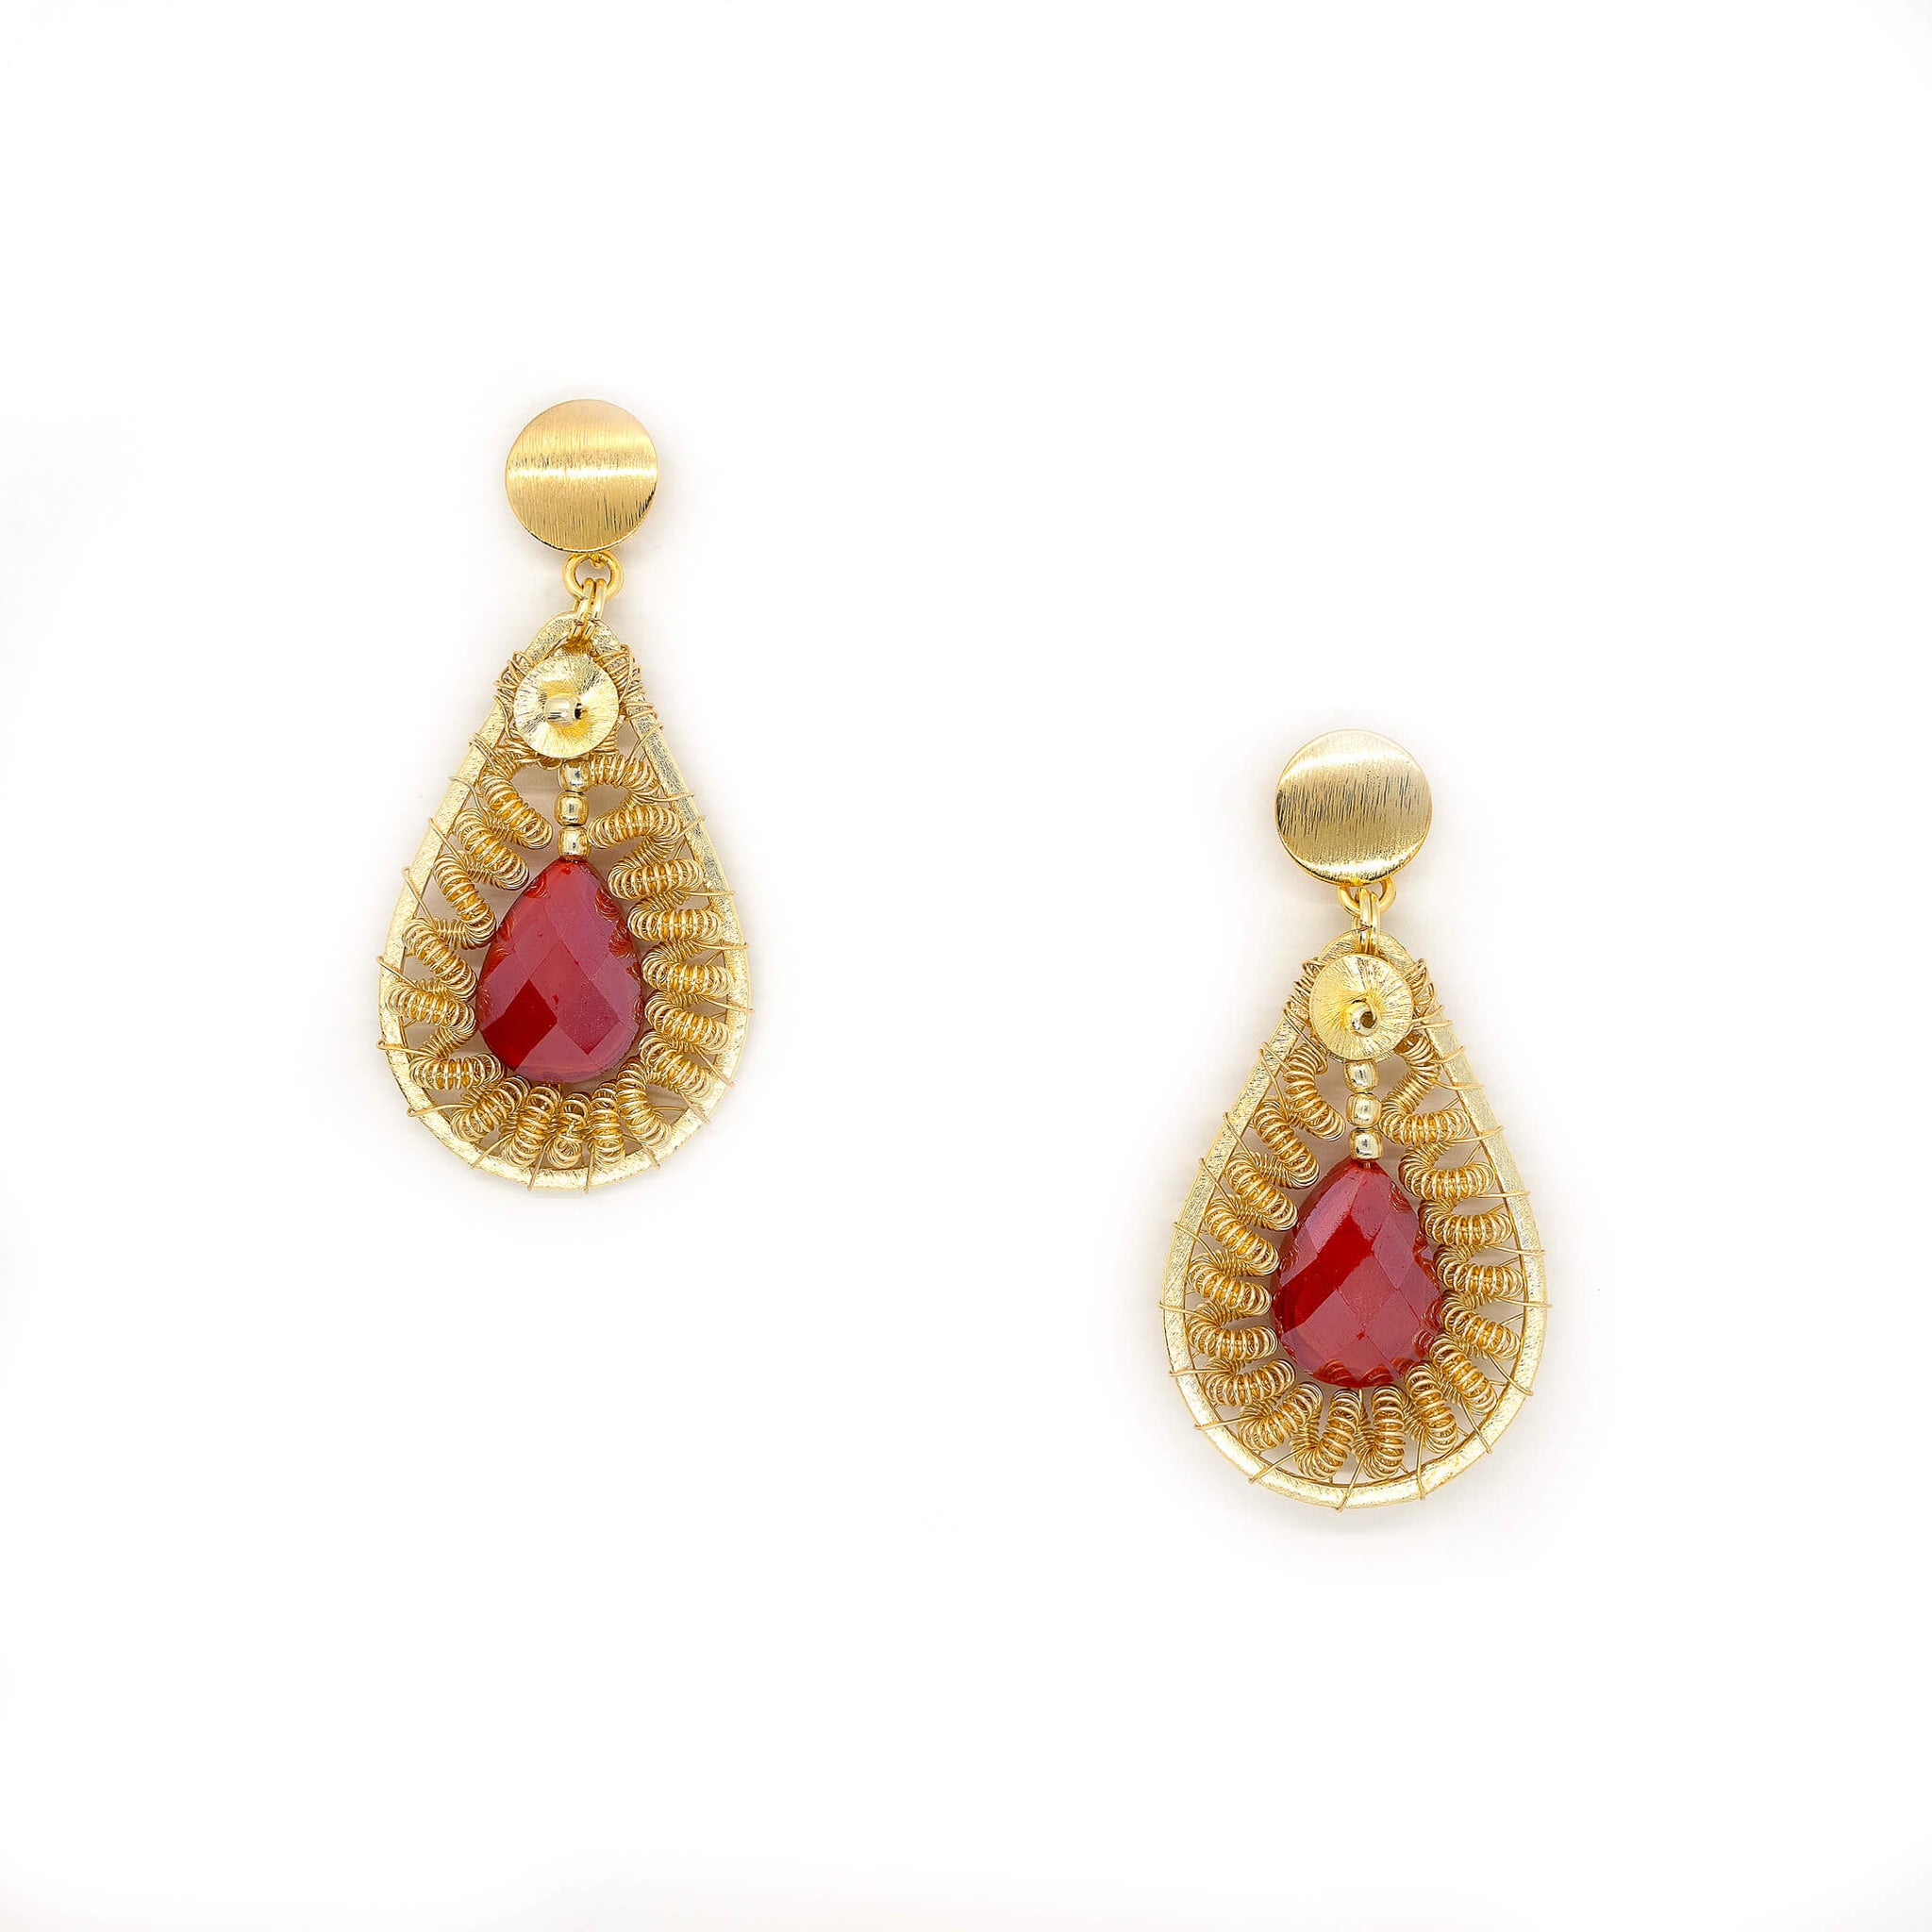 The Jasmit teardrop Earrings are 2 inches long, Gold and red Earrings. Wire Wrapped Earrings. Handmade Gold dangle earrings. Feature gold-plated wire and faceted teardrop crystal beads.